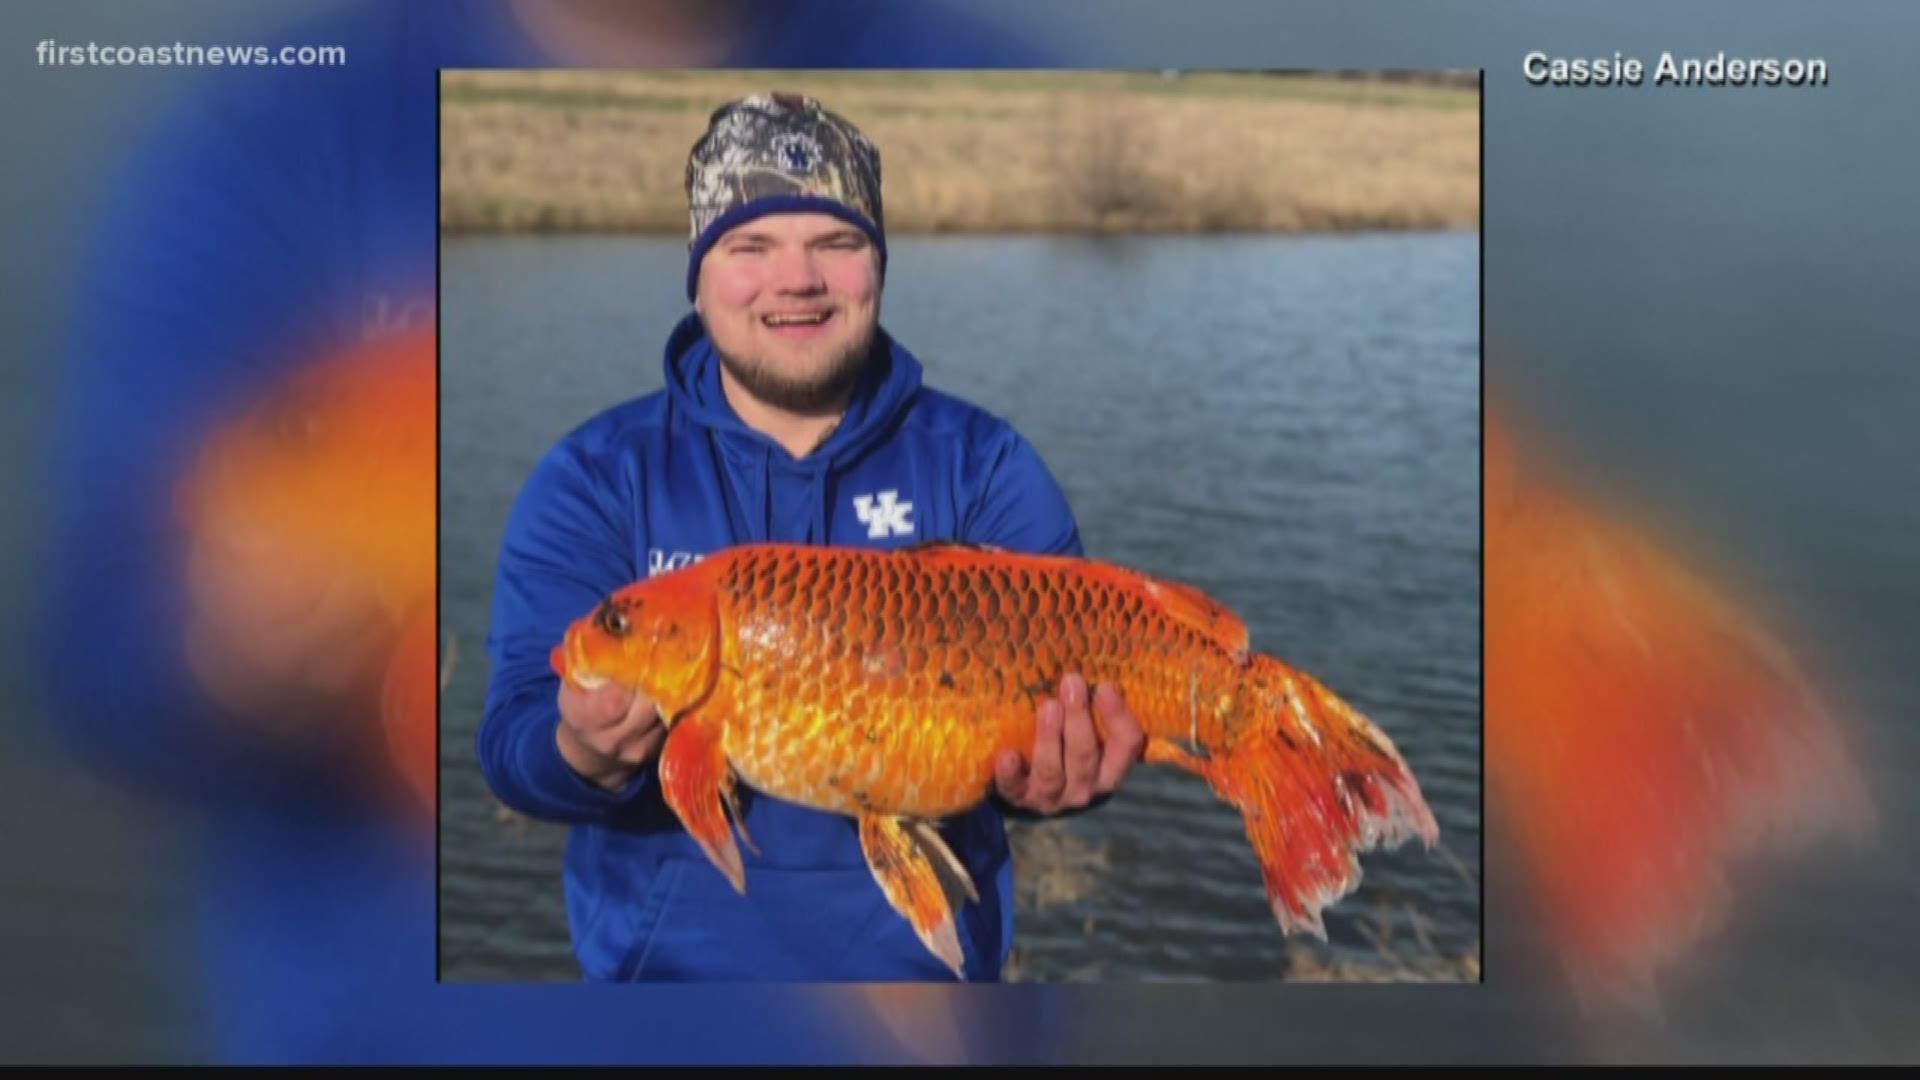 Hunter Anderson was fishing in a pond when he caught the 20-pound-goldfish. Anderson released the fish back into the pond.